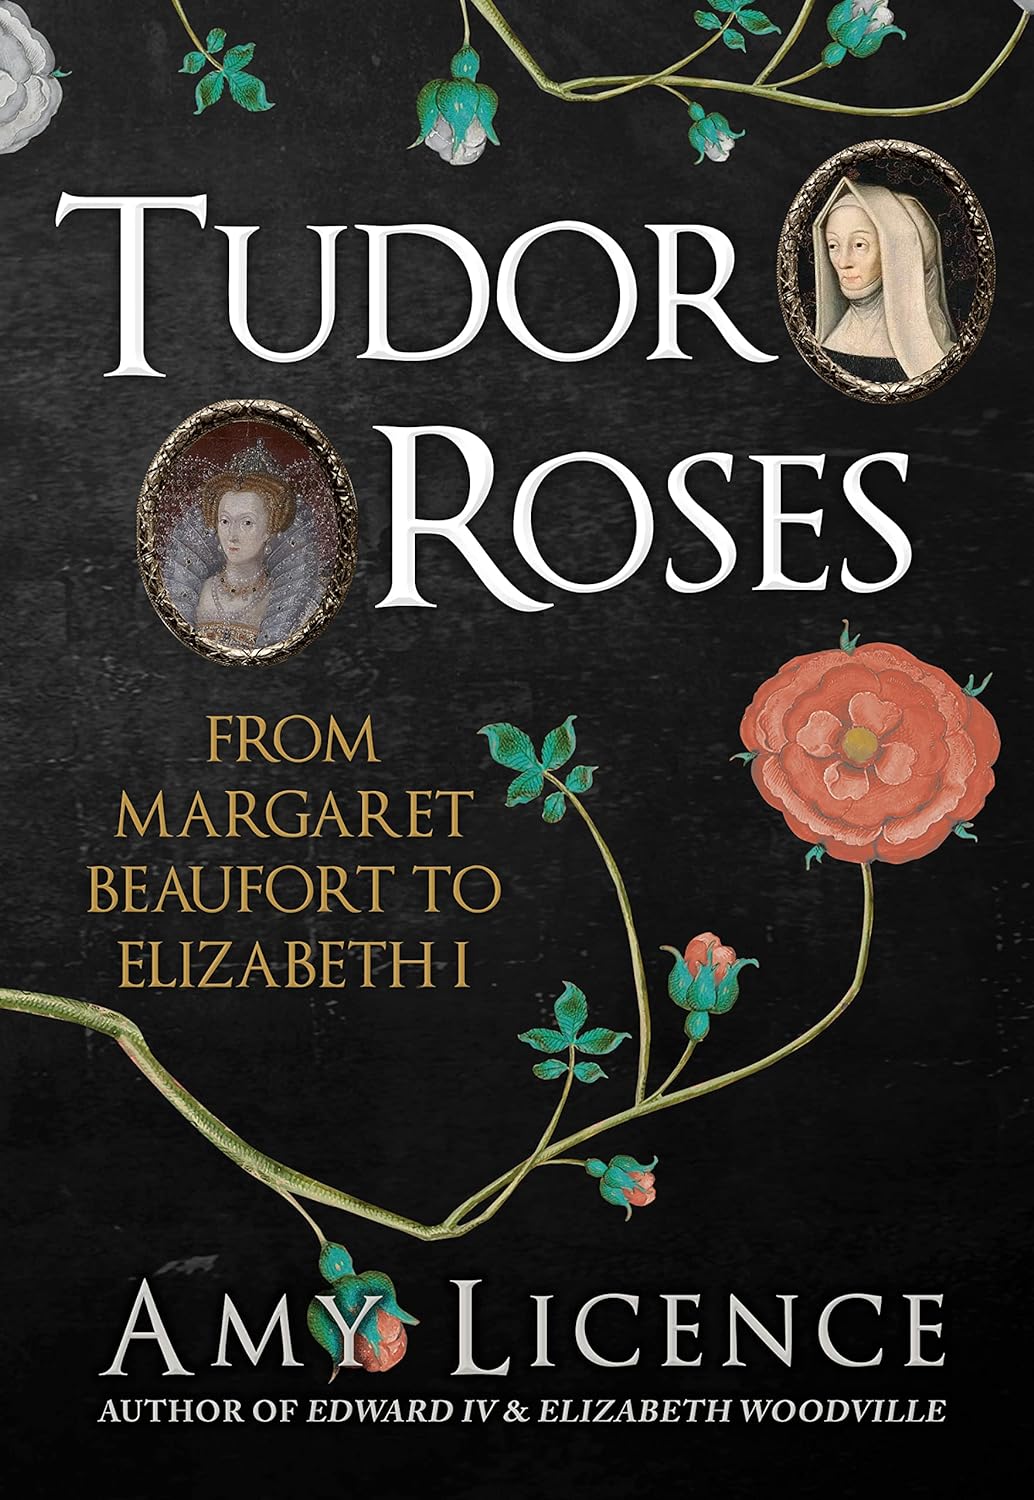 Unlock Your Savings Now! Tudor Roses: From Margaret Beaufort to Elizabeth I - Up to 27% Off